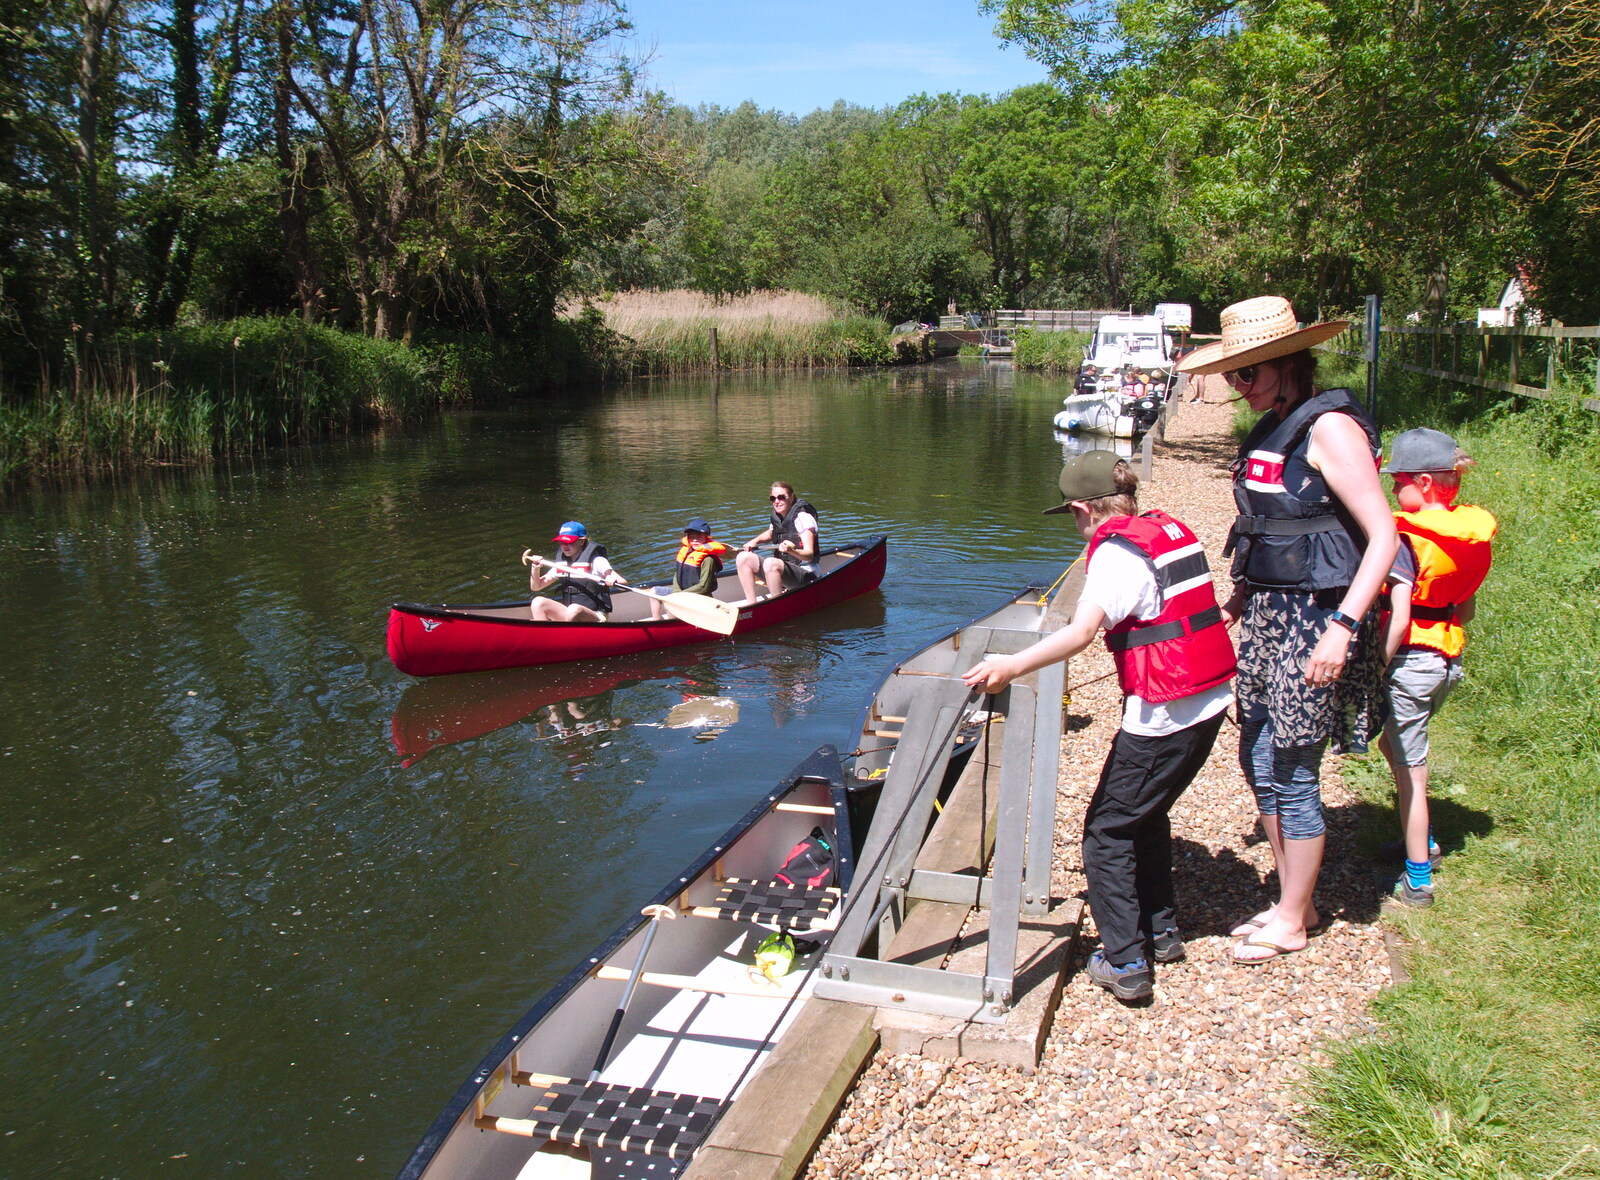 We're off again back to the campsite from Camping at Three Rivers, Geldeston, Norfolk - 1st June 2019